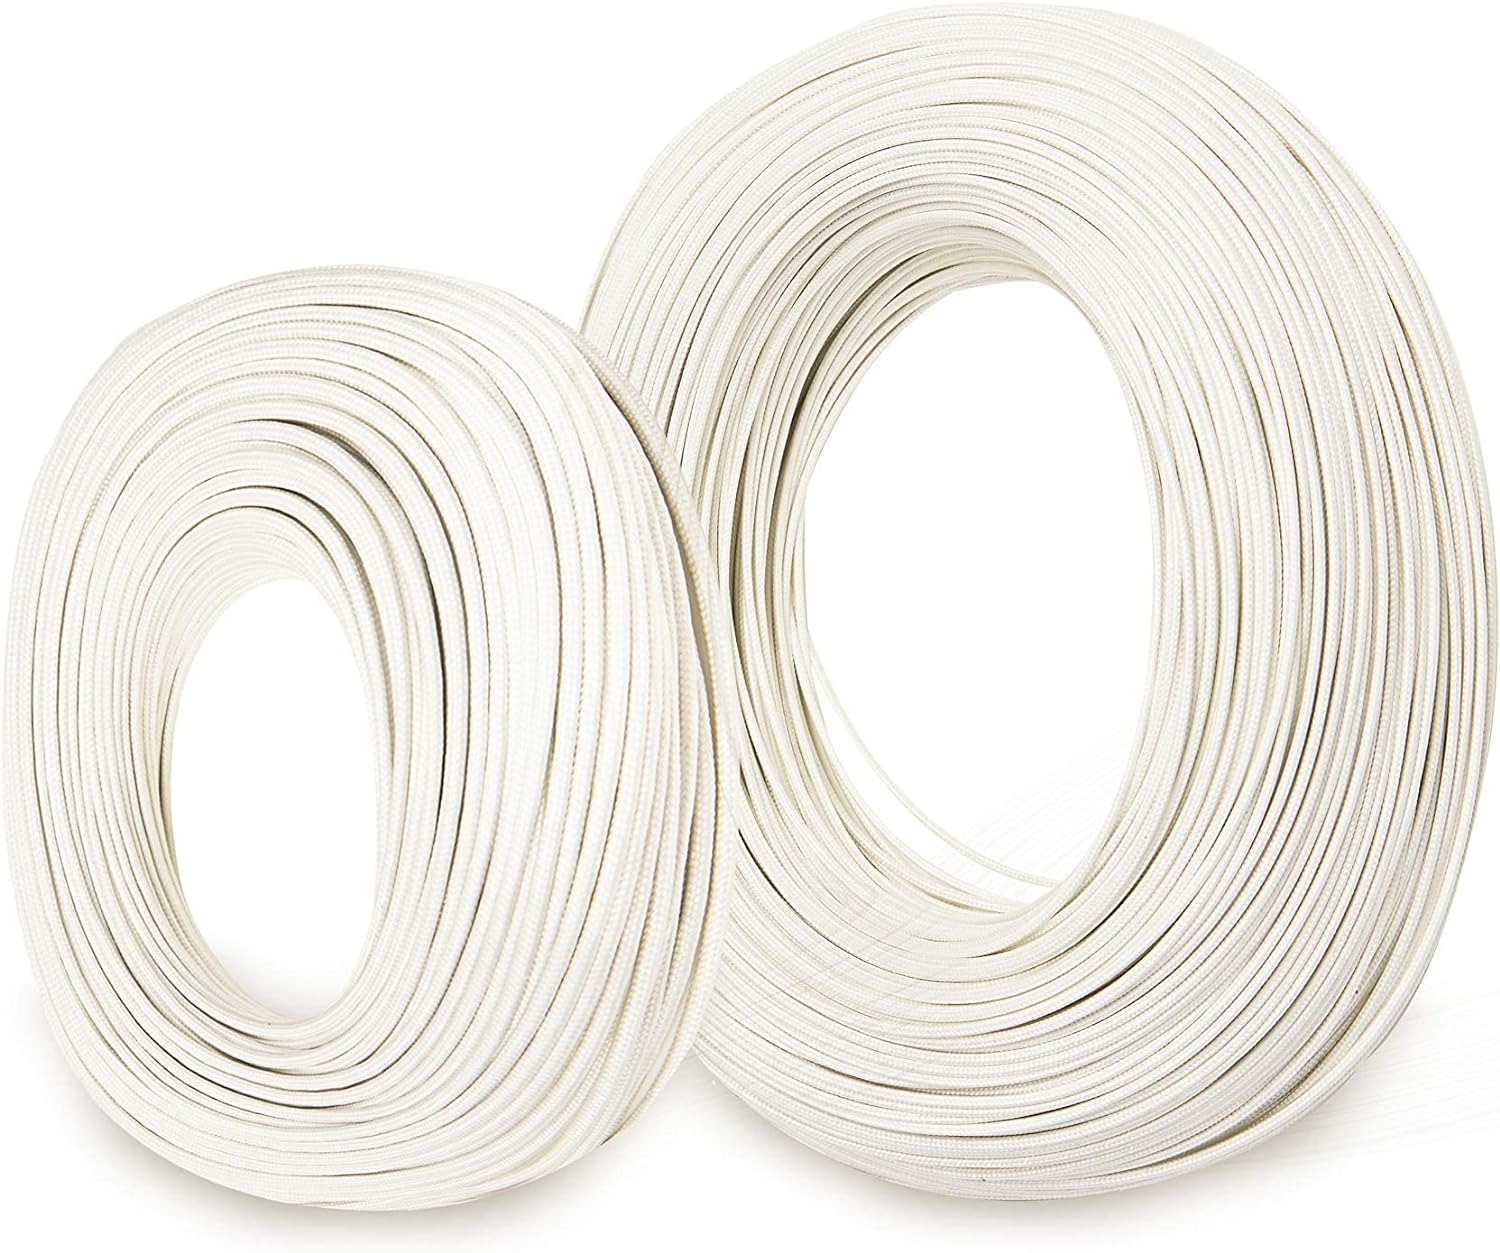 Mica High Temperature Wire -60~450 Degree C,Strands of Nickel Plated Copper Wire